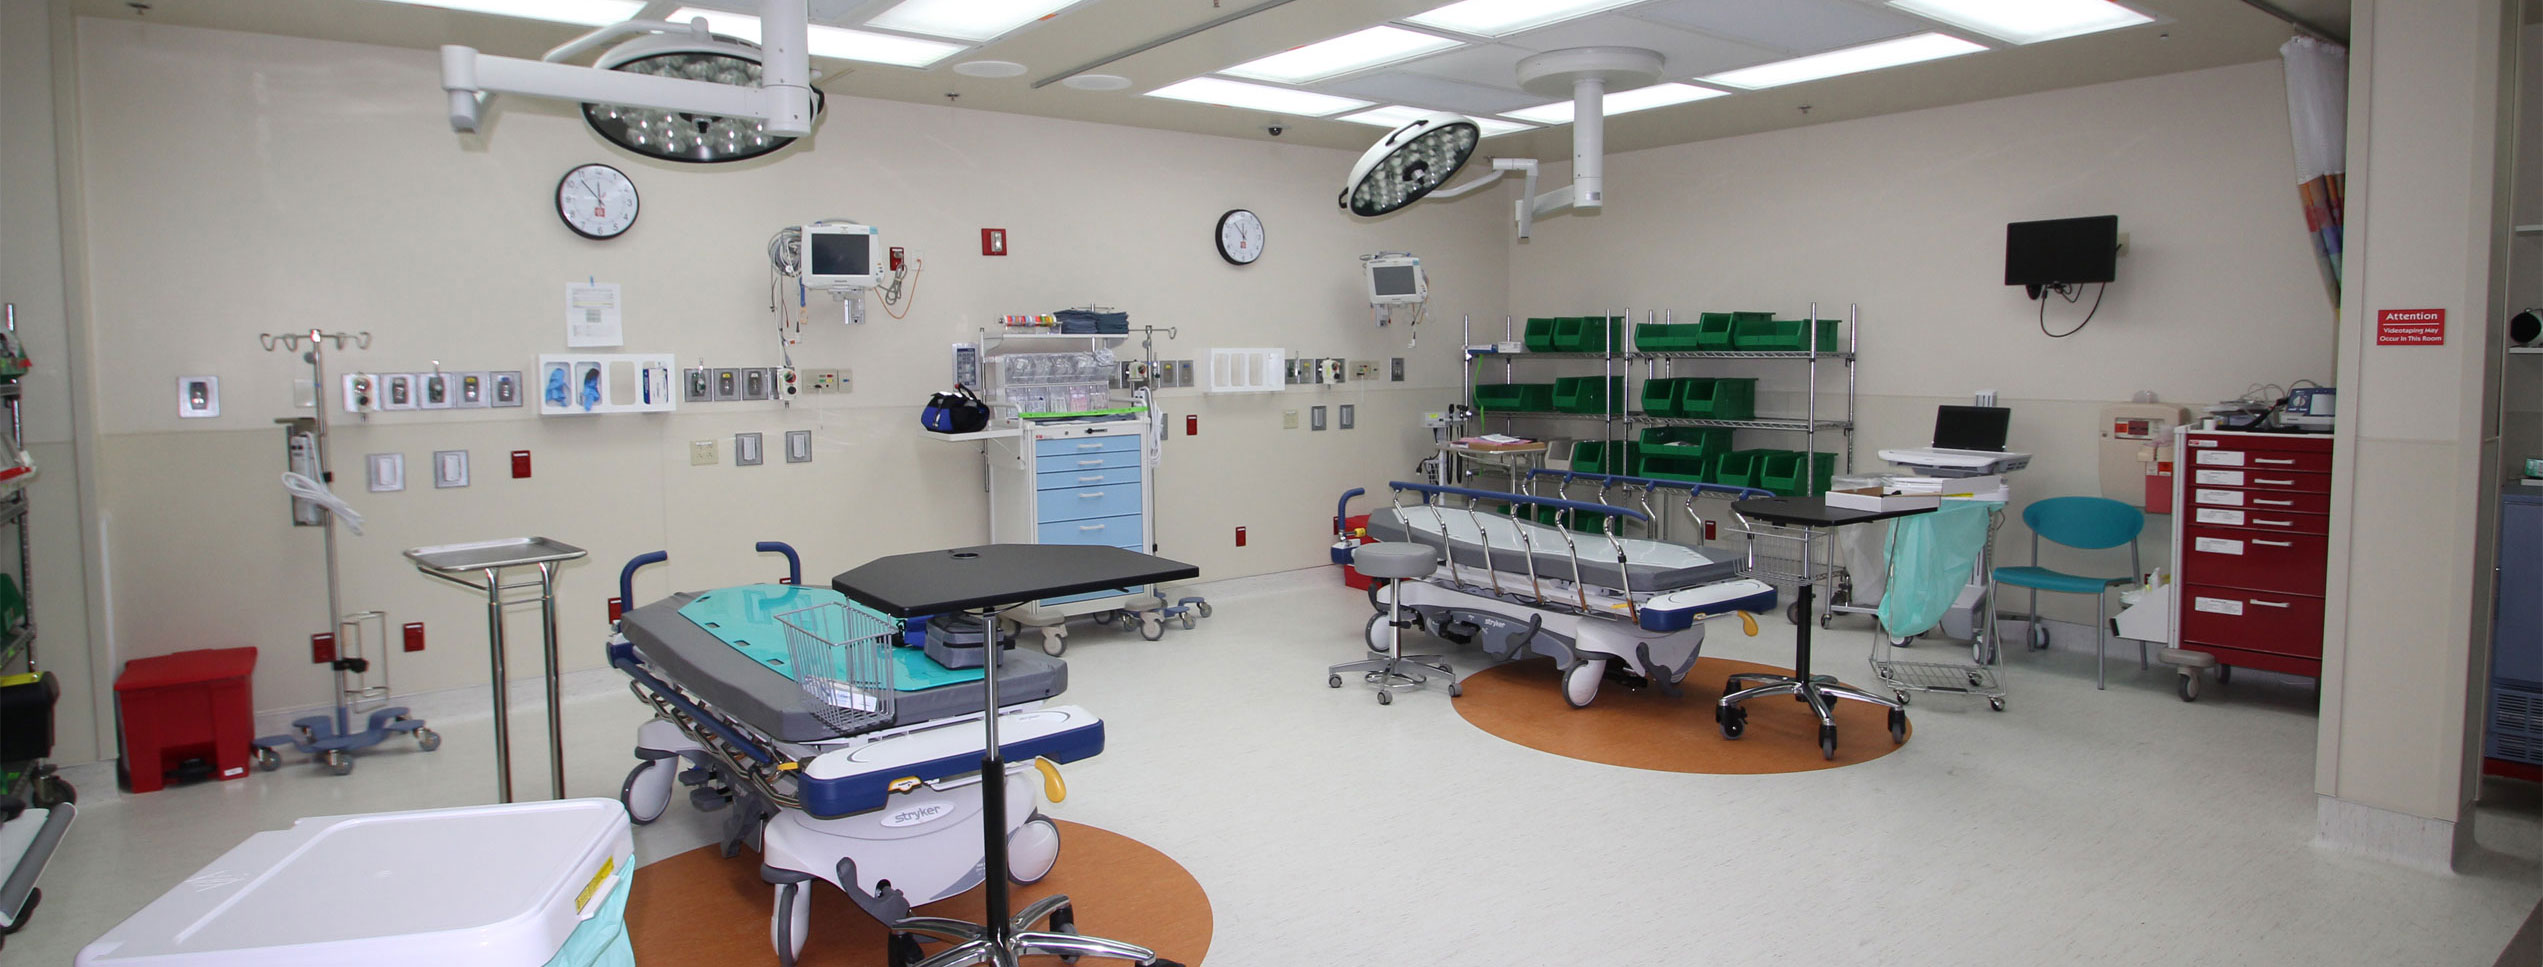 Emergency Department room that has been renovated 